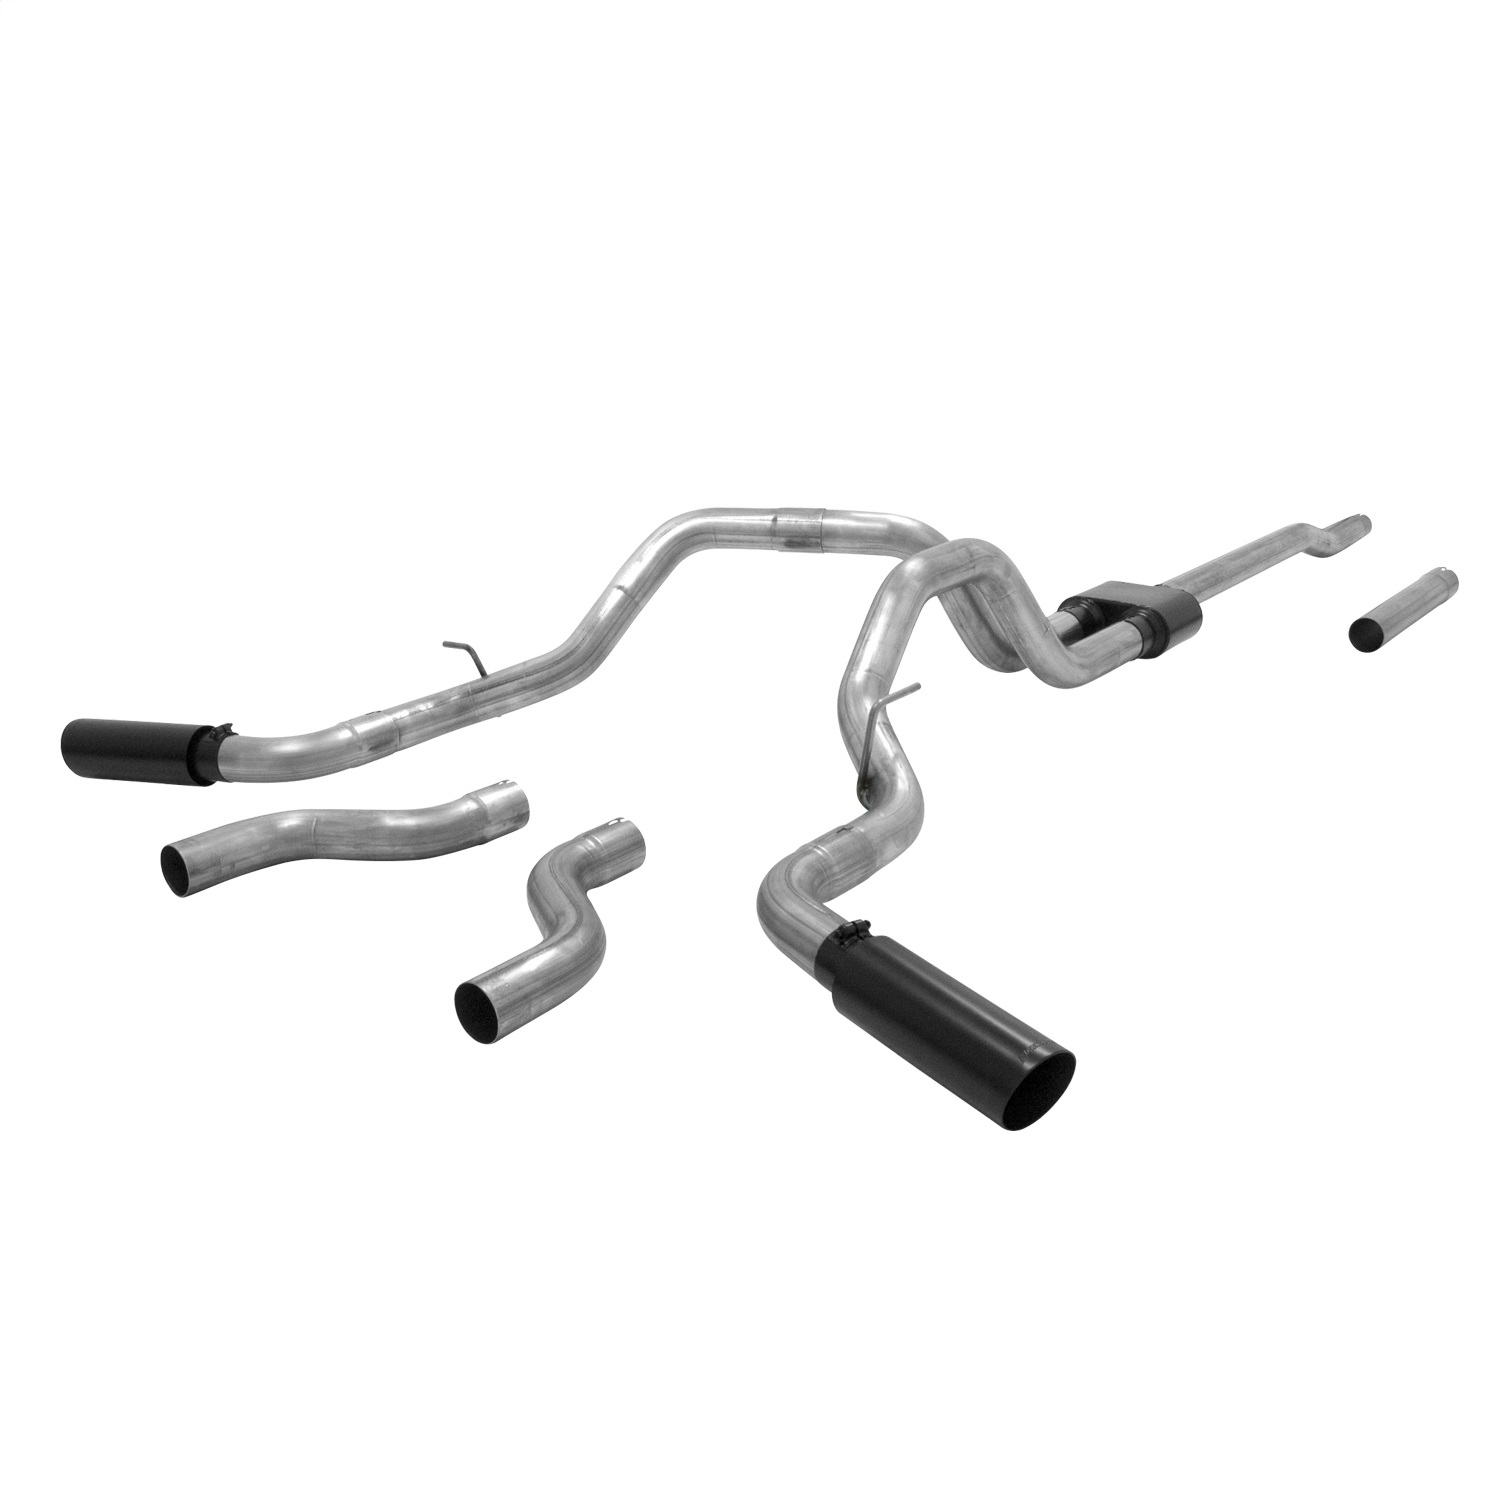 Flowmaster Flowmaster 817696 Outlaw Series Cat Back Exhaust System